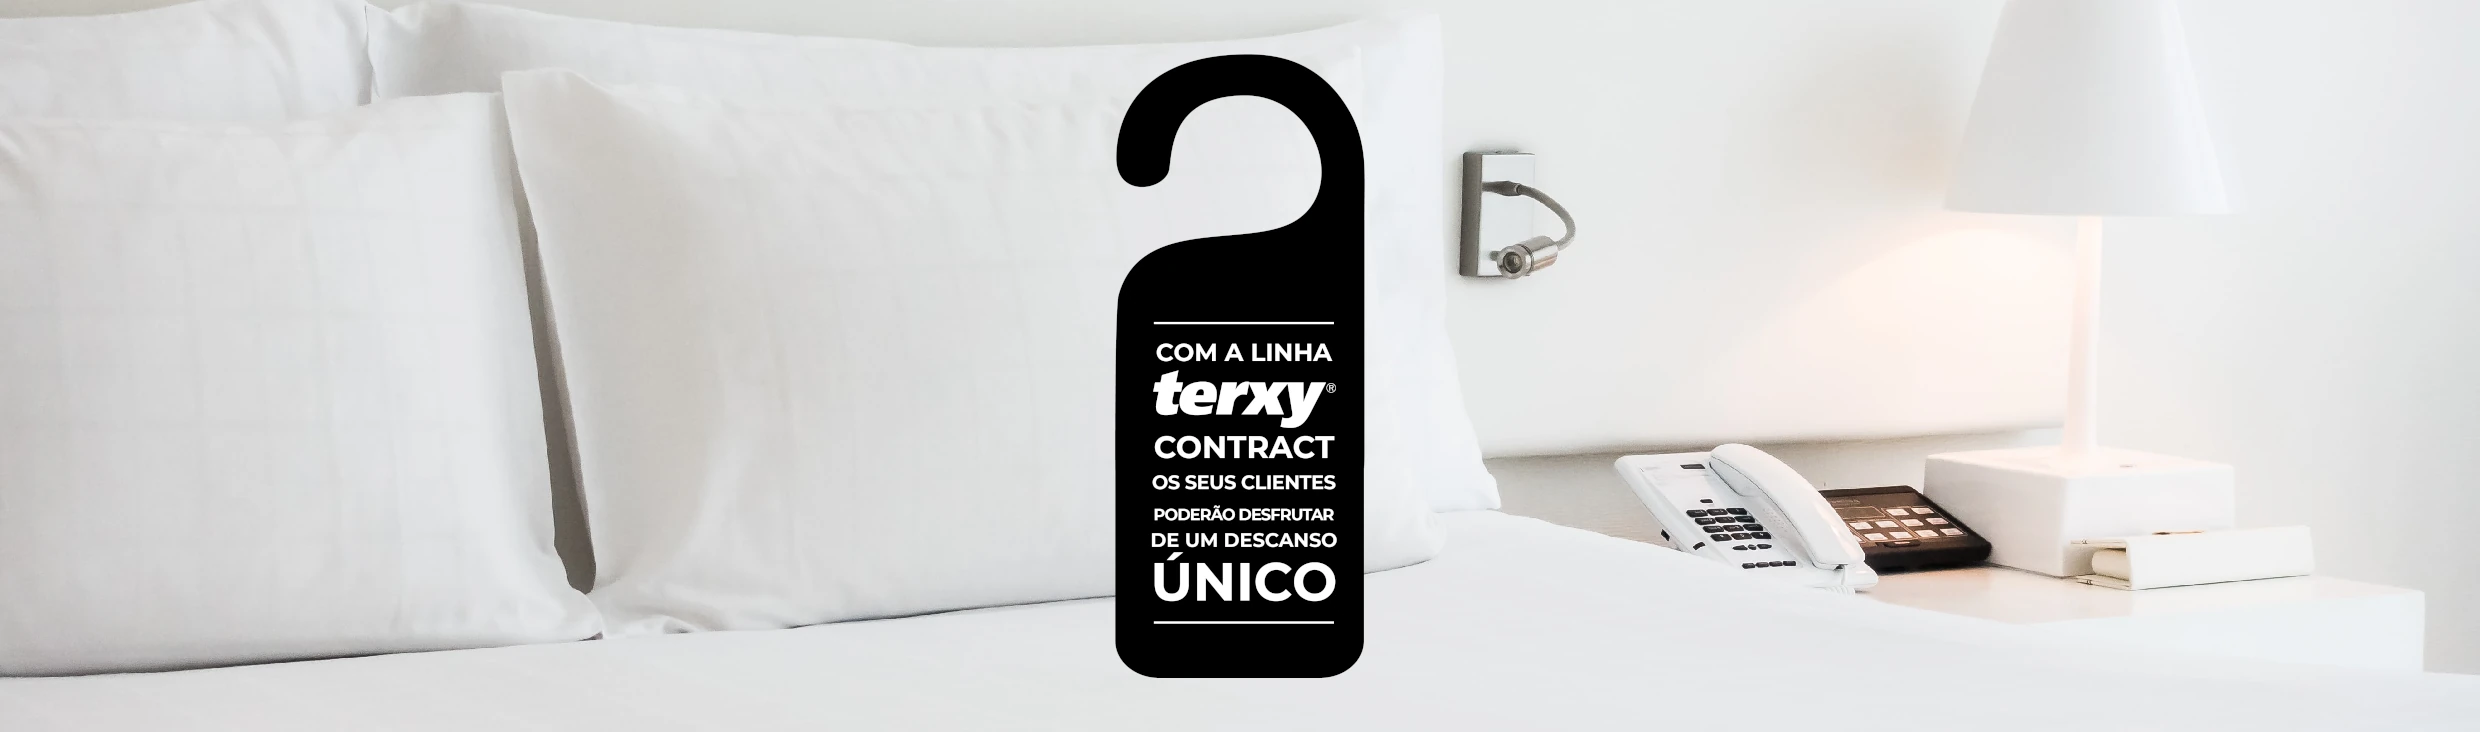 Cabecera hotel contract terxy